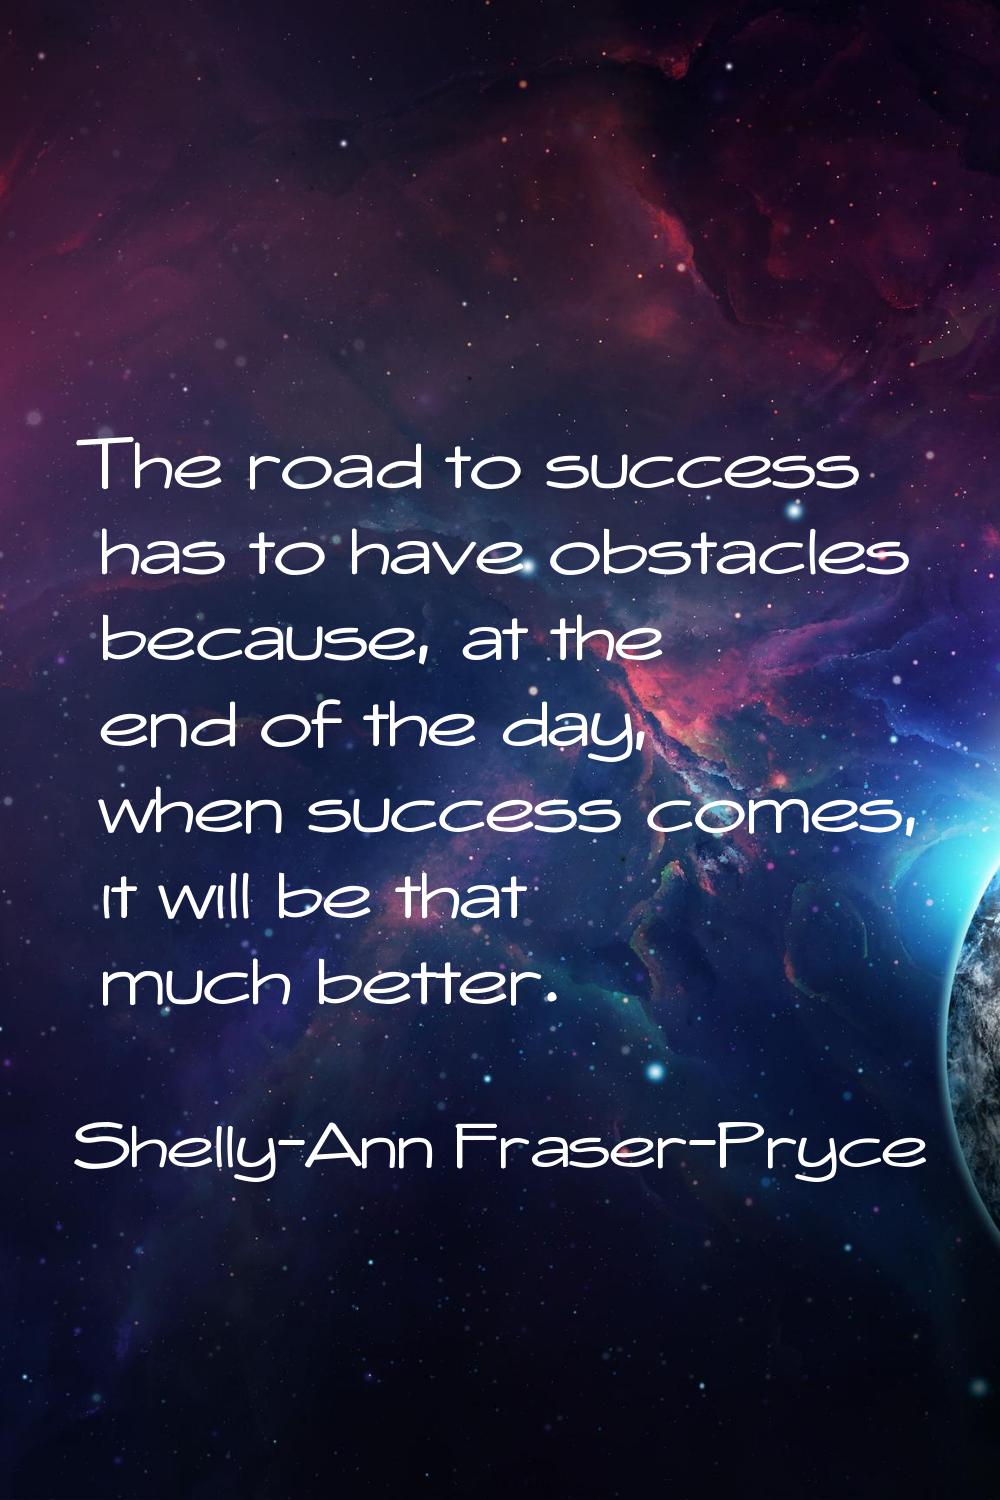 The road to success has to have obstacles because, at the end of the day, when success comes, it wi